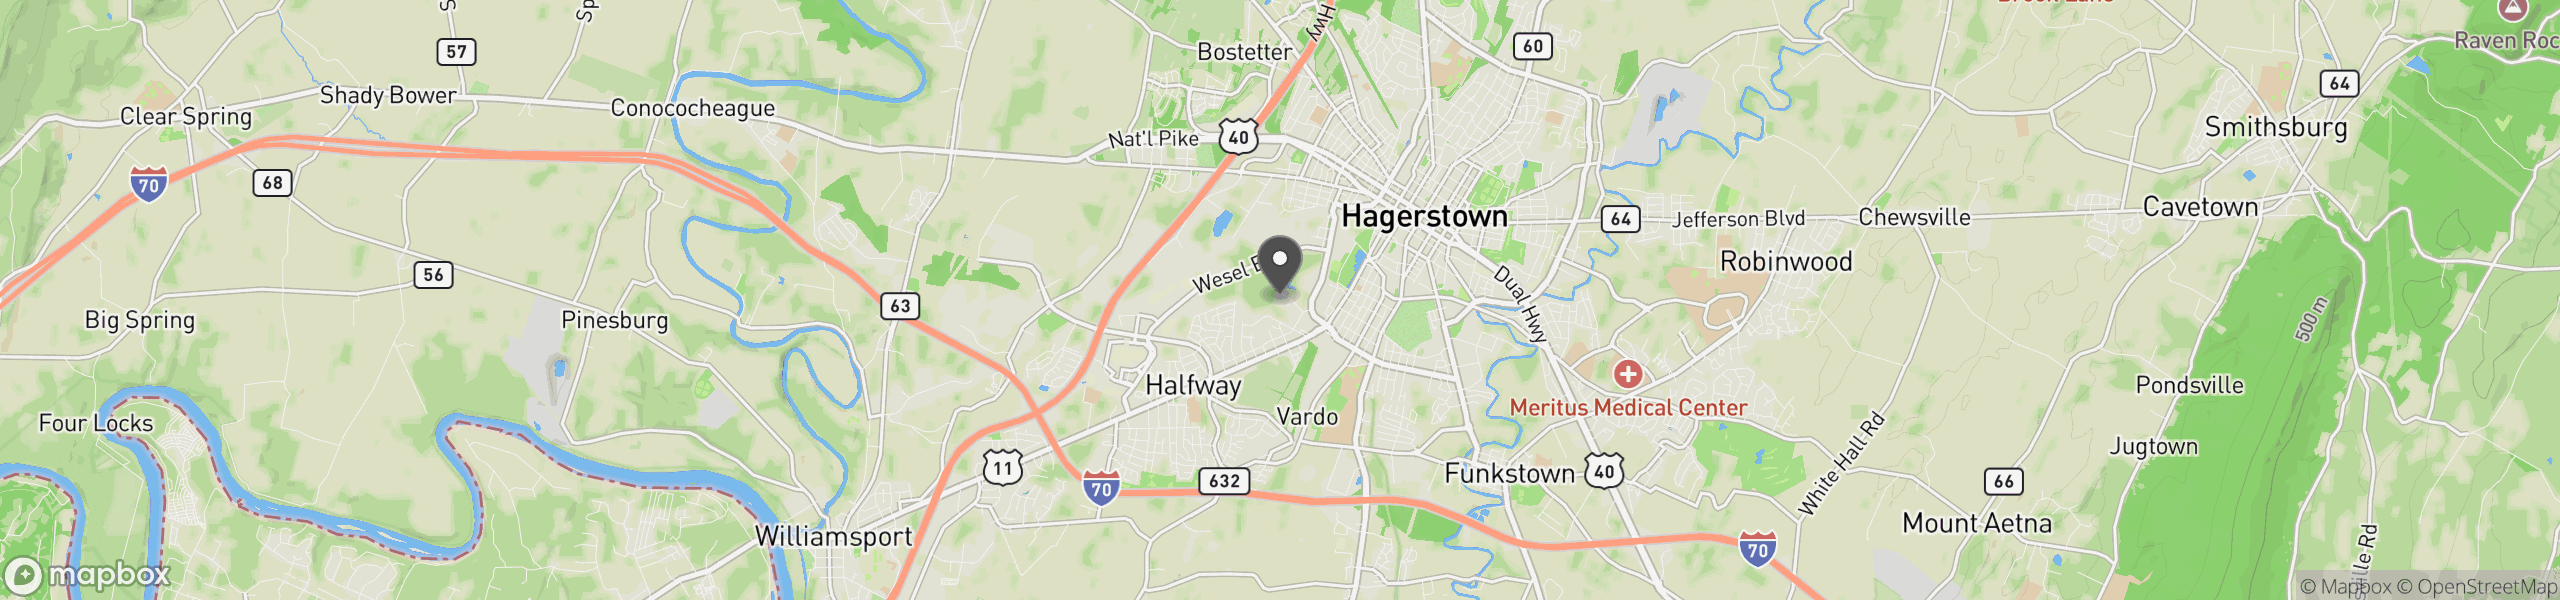 Hagerstown, MD 21740